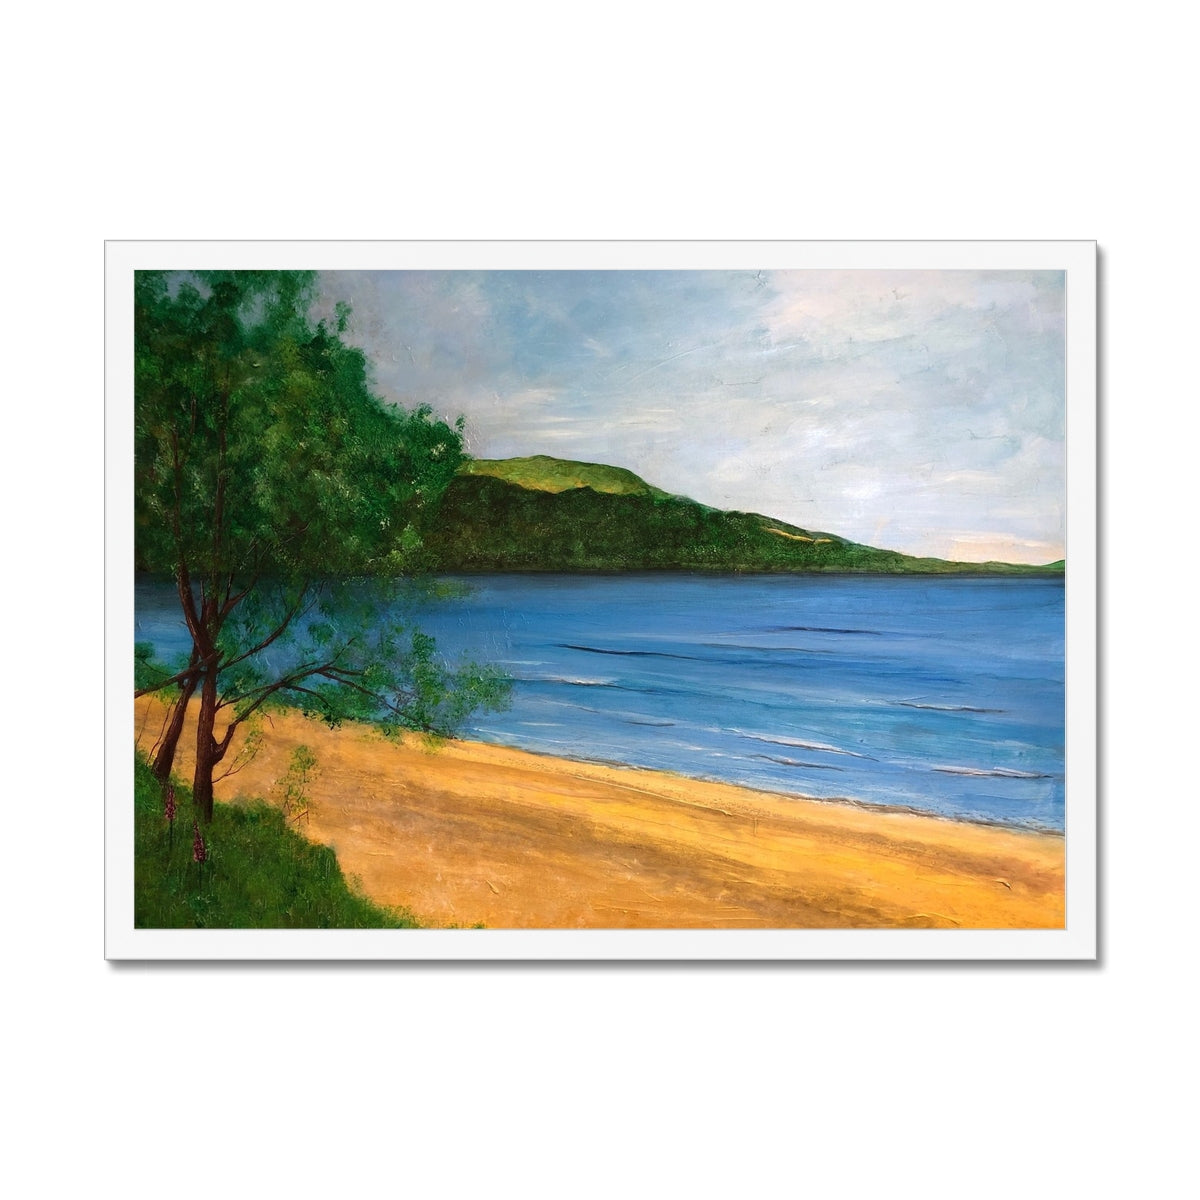 Loch Rannoch Painting | Framed Prints From Scotland-Framed Prints-Scottish Lochs & Mountains Art Gallery-A2 Landscape-White Frame-Paintings, Prints, Homeware, Art Gifts From Scotland By Scottish Artist Kevin Hunter